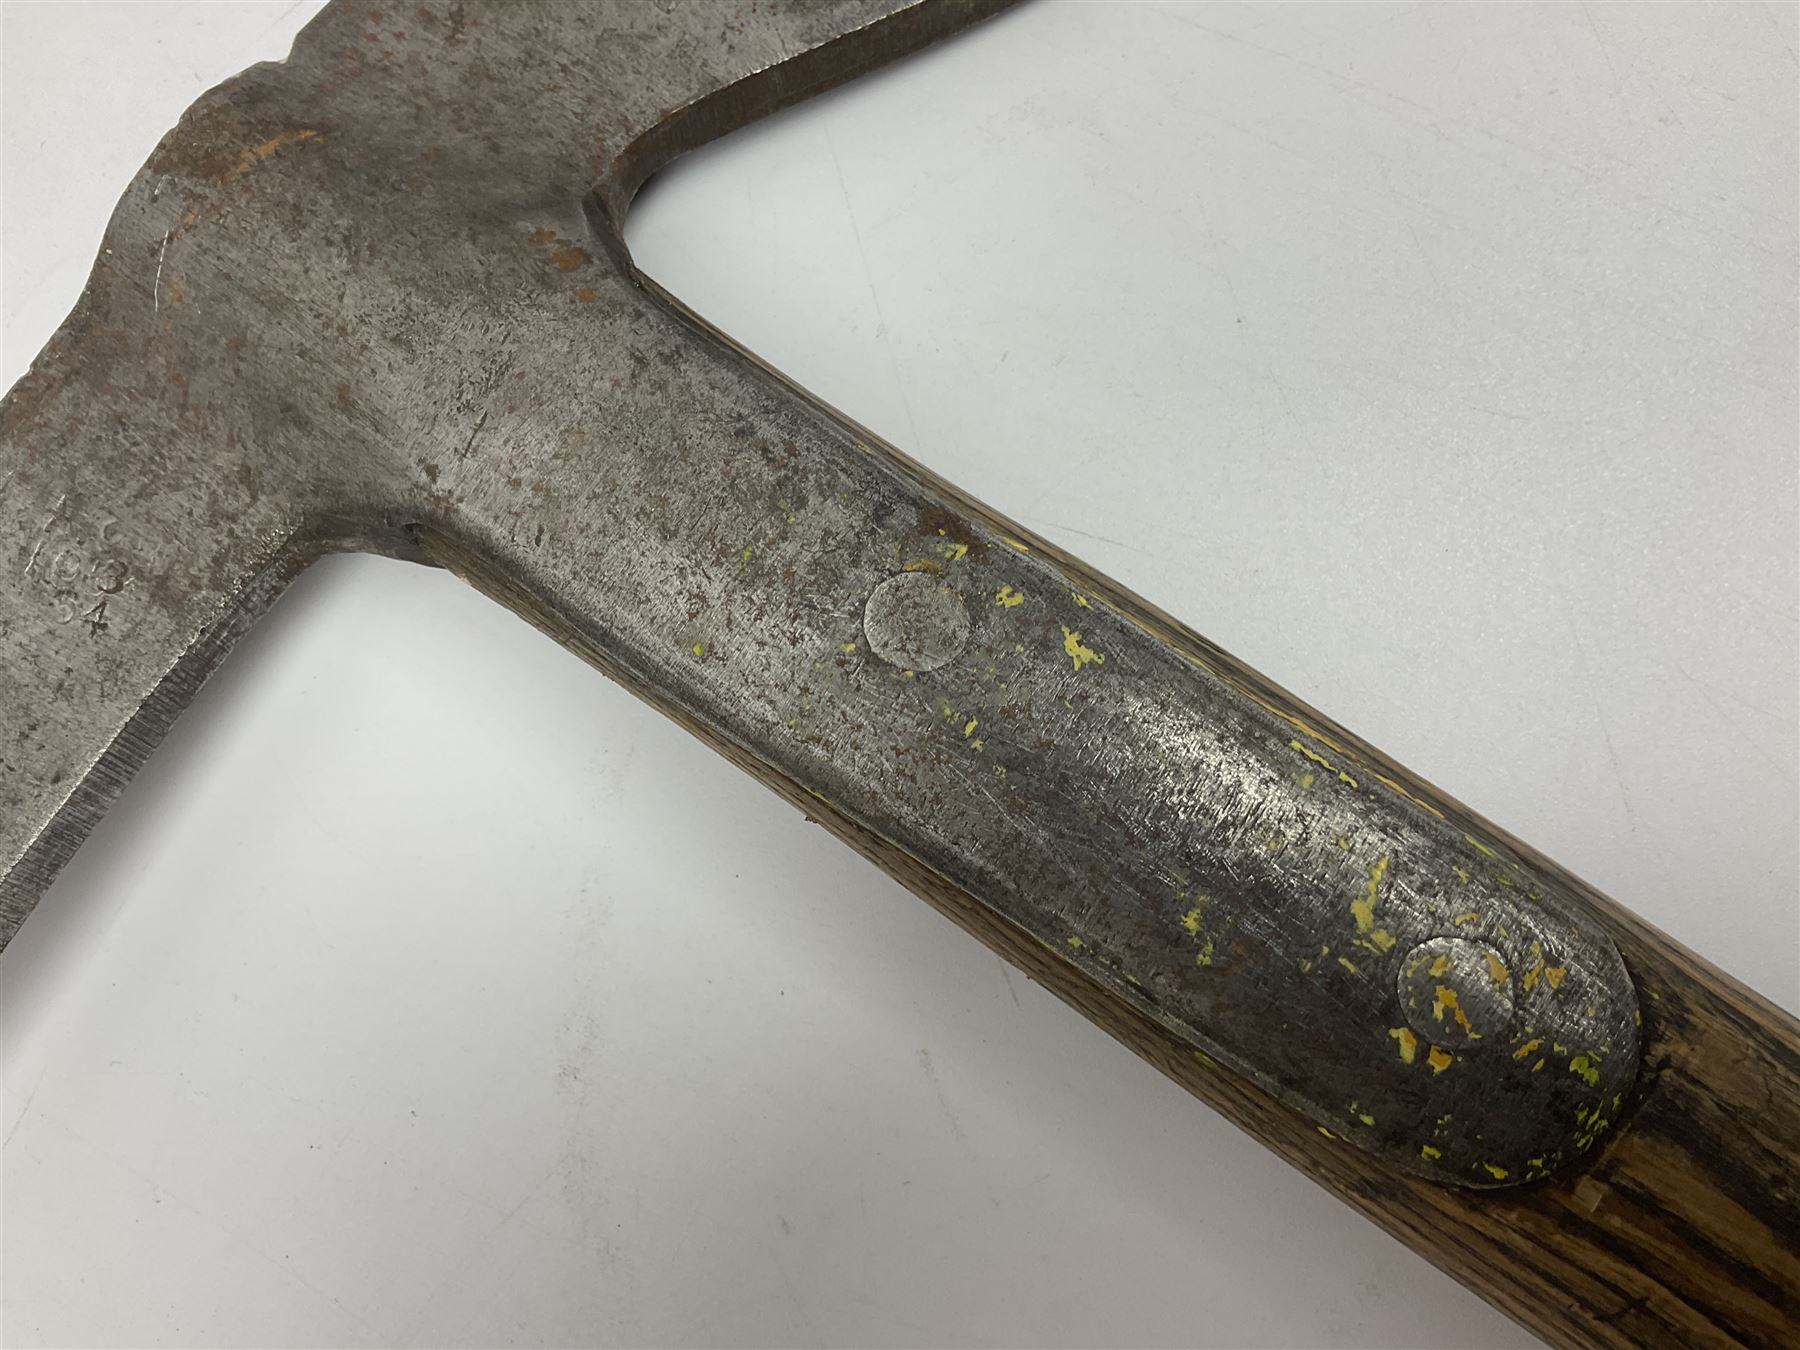 Post-War military type fireman's axe impressed 'PERKS 1953/54' with additional indistinct mark proba - Image 14 of 19